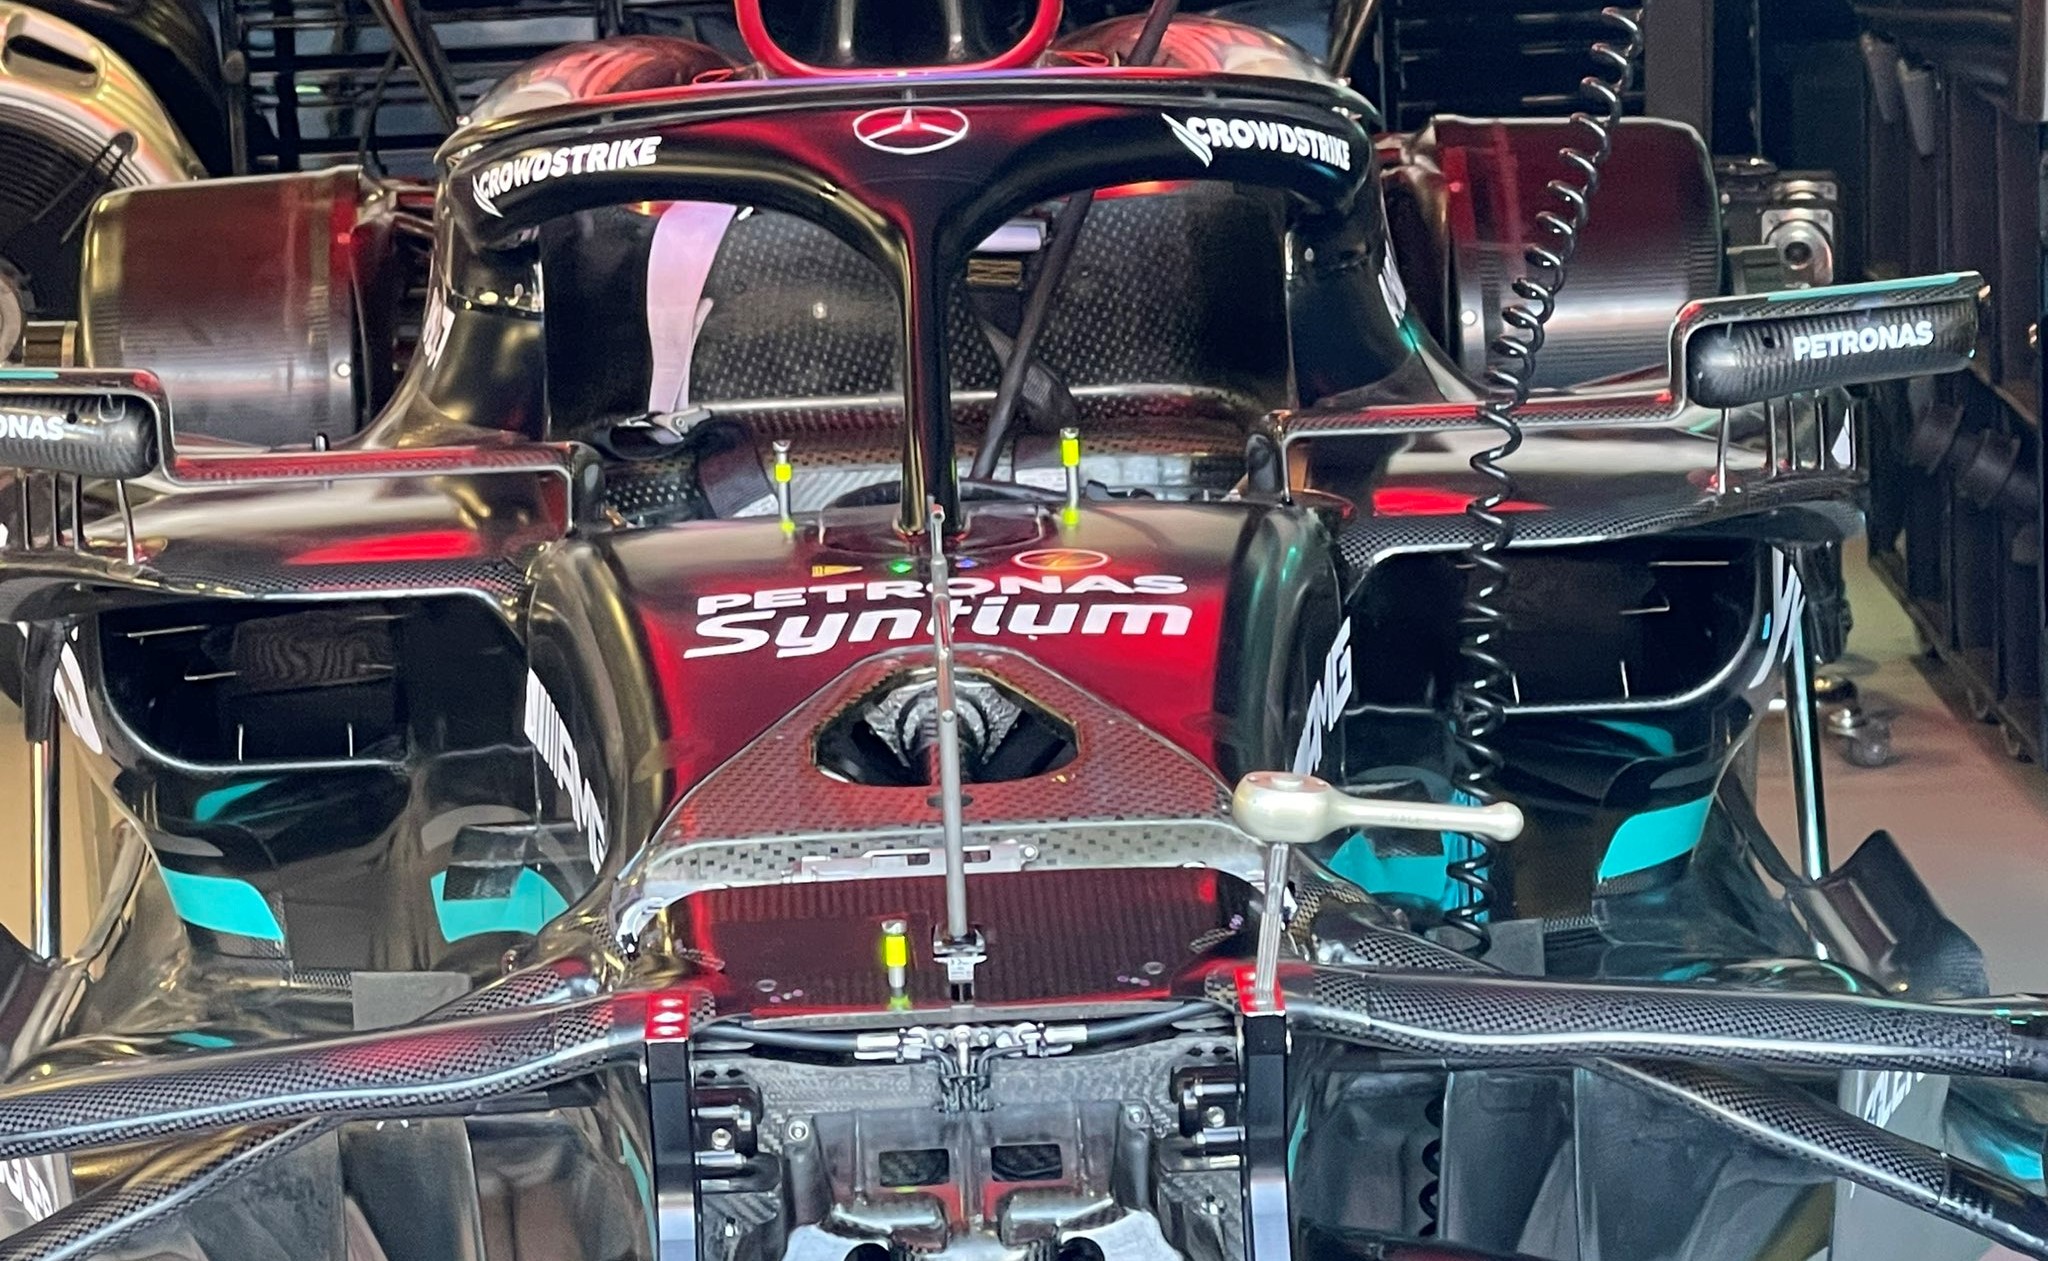 Mercedes reveals major upgrade with new sidepods